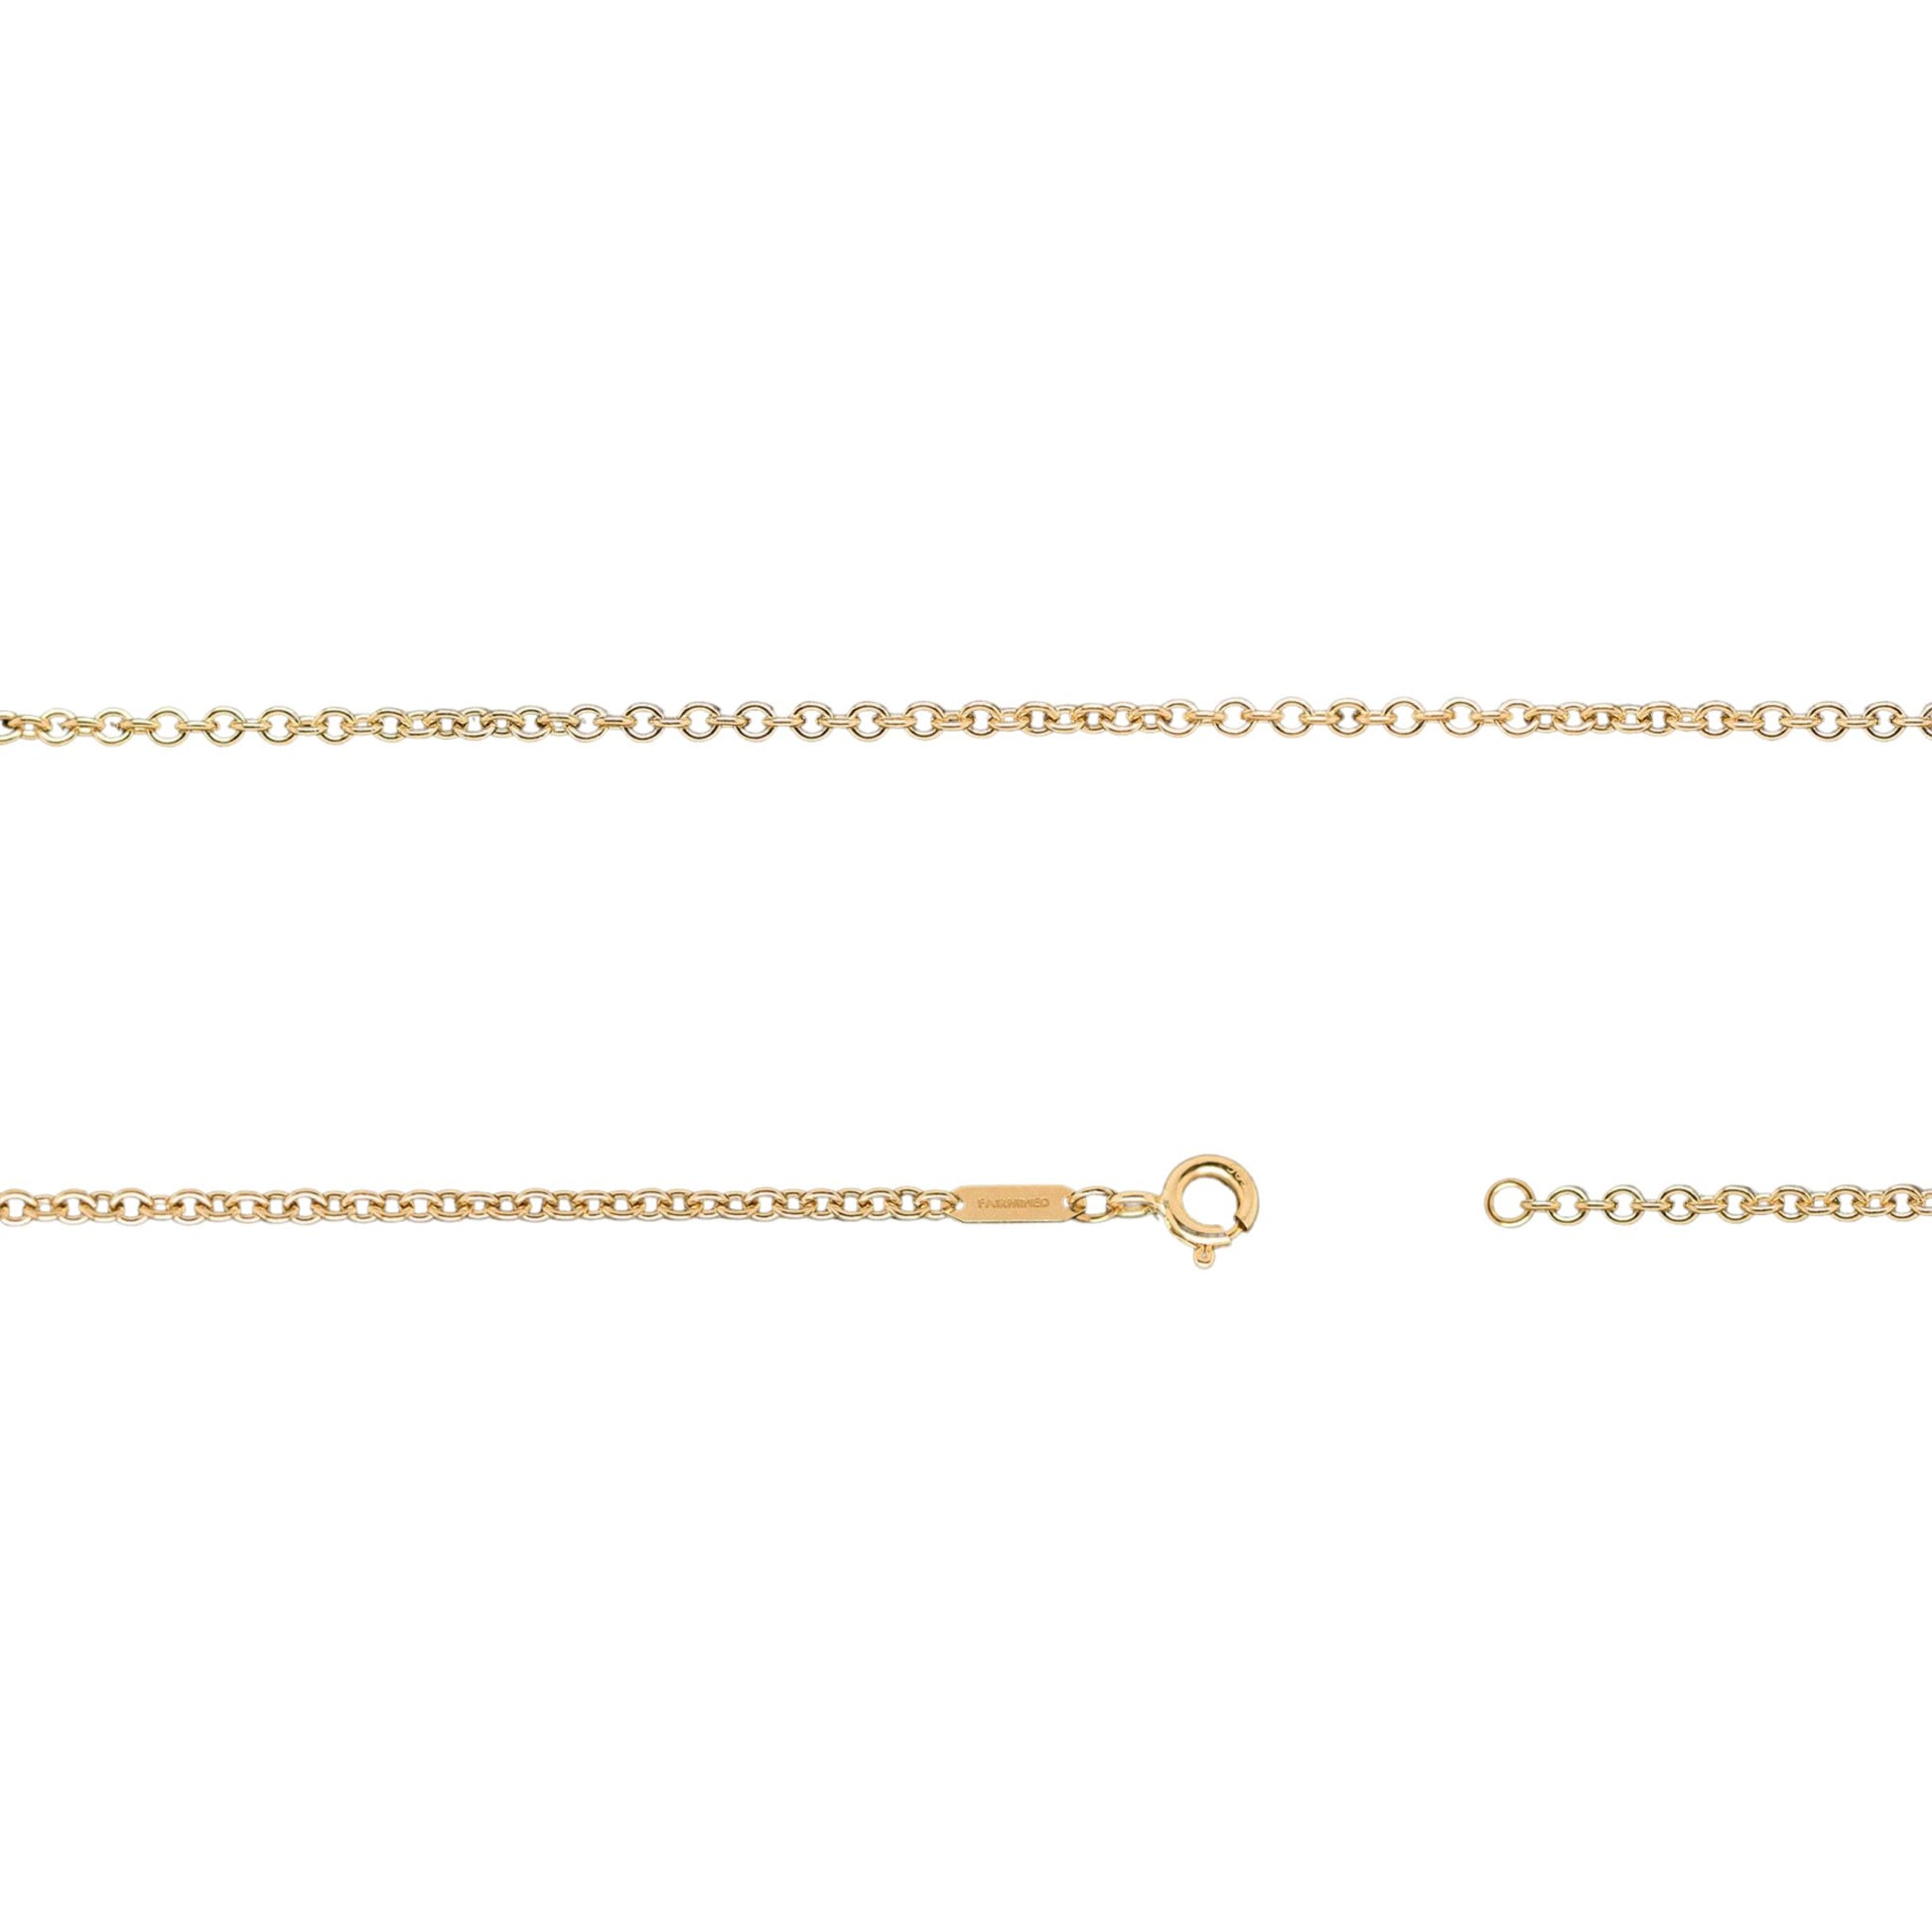 2.28mm x 2.5mm Cable Chain in Fairmined Yellow Gold - W.R. Metalarts